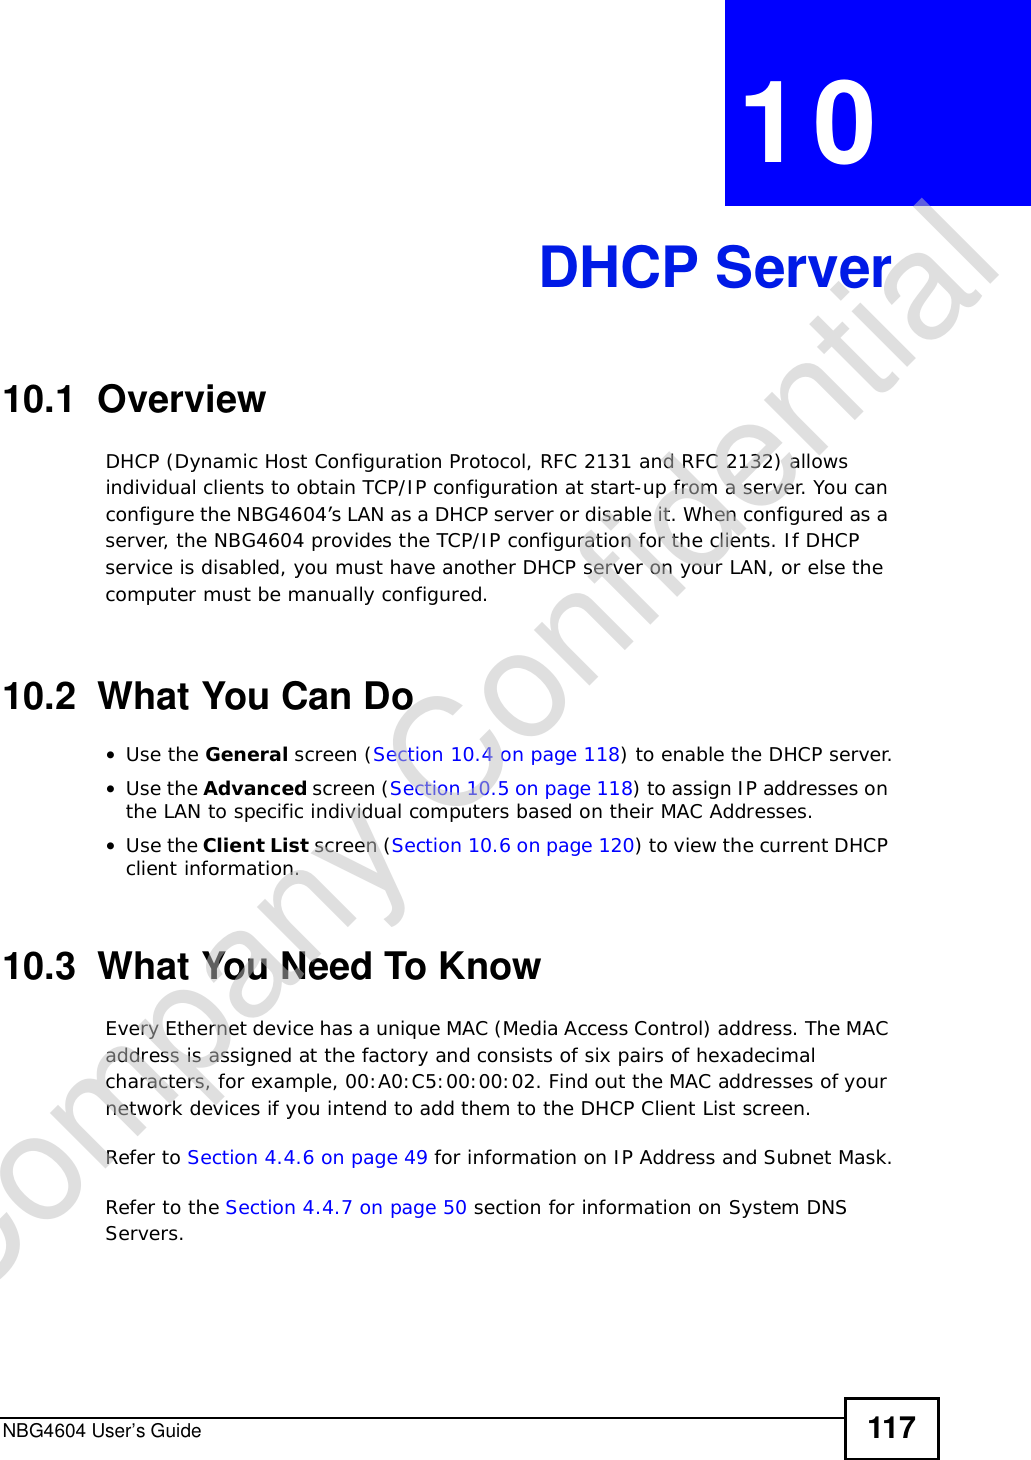 NBG4604 User’s Guide 117CHAPTER 10DHCP Server10.1  OverviewDHCP (Dynamic Host Configuration Protocol, RFC 2131 and RFC 2132) allows individual clients to obtain TCP/IP configuration at start-up from a server. You can configure the NBG4604’s LAN as a DHCP server or disable it. When configured as a server, the NBG4604 provides the TCP/IP configuration for the clients. If DHCP service is disabled, you must have another DHCP server on your LAN, or else the computer must be manually configured.10.2  What You Can Do•Use the General screen (Section 10.4 on page 118) to enable the DHCP server.•Use the Advanced screen (Section 10.5 on page 118) to assign IP addresses on the LAN to specific individual computers based on their MAC Addresses.•Use the Client List screen (Section 10.6 on page 120) to view the current DHCP client information. 10.3  What You Need To KnowEvery Ethernet device has a unique MAC (Media Access Control) address. The MAC address is assigned at the factory and consists of six pairs of hexadecimal characters, for example, 00:A0:C5:00:00:02. Find out the MAC addresses of your network devices if you intend to add them to the DHCP Client List screen.Refer to Section 4.4.6 on page 49 for information on IP Address and Subnet Mask.Refer to the Section 4.4.7 on page 50 section for information on System DNS Servers.Company Confidential